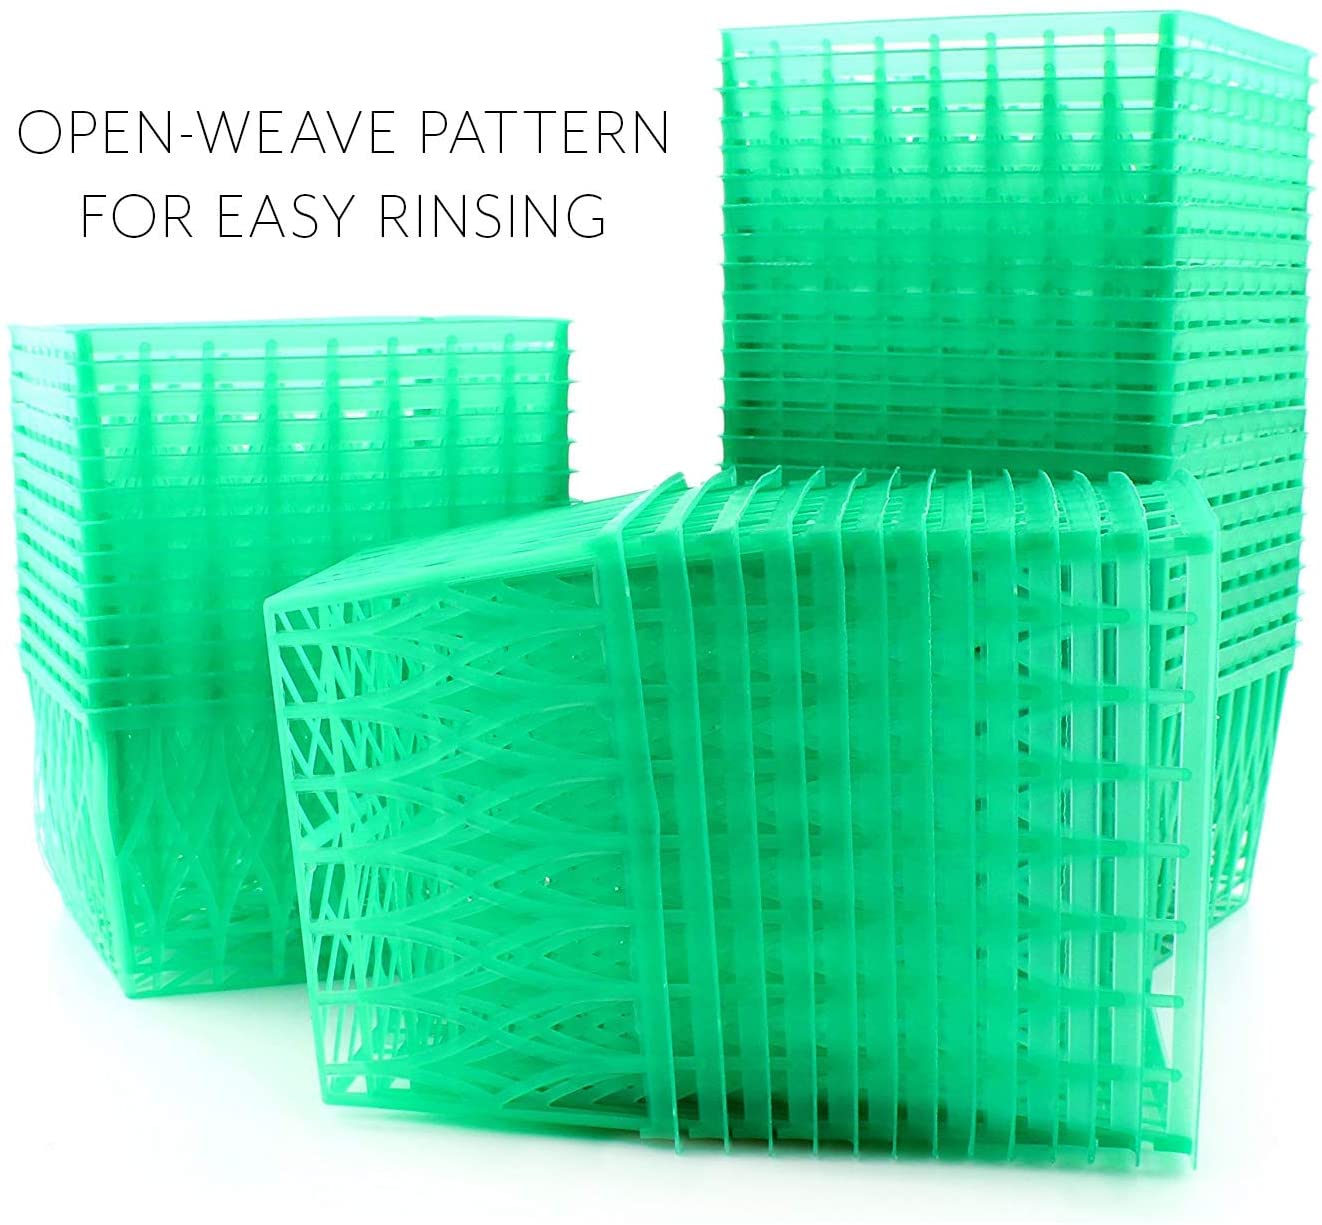 48-Pack Pint Size Plastic Berry Baskets, 4-Inch Berry Boxes with Open-Weave Pattern (48 Boxes)